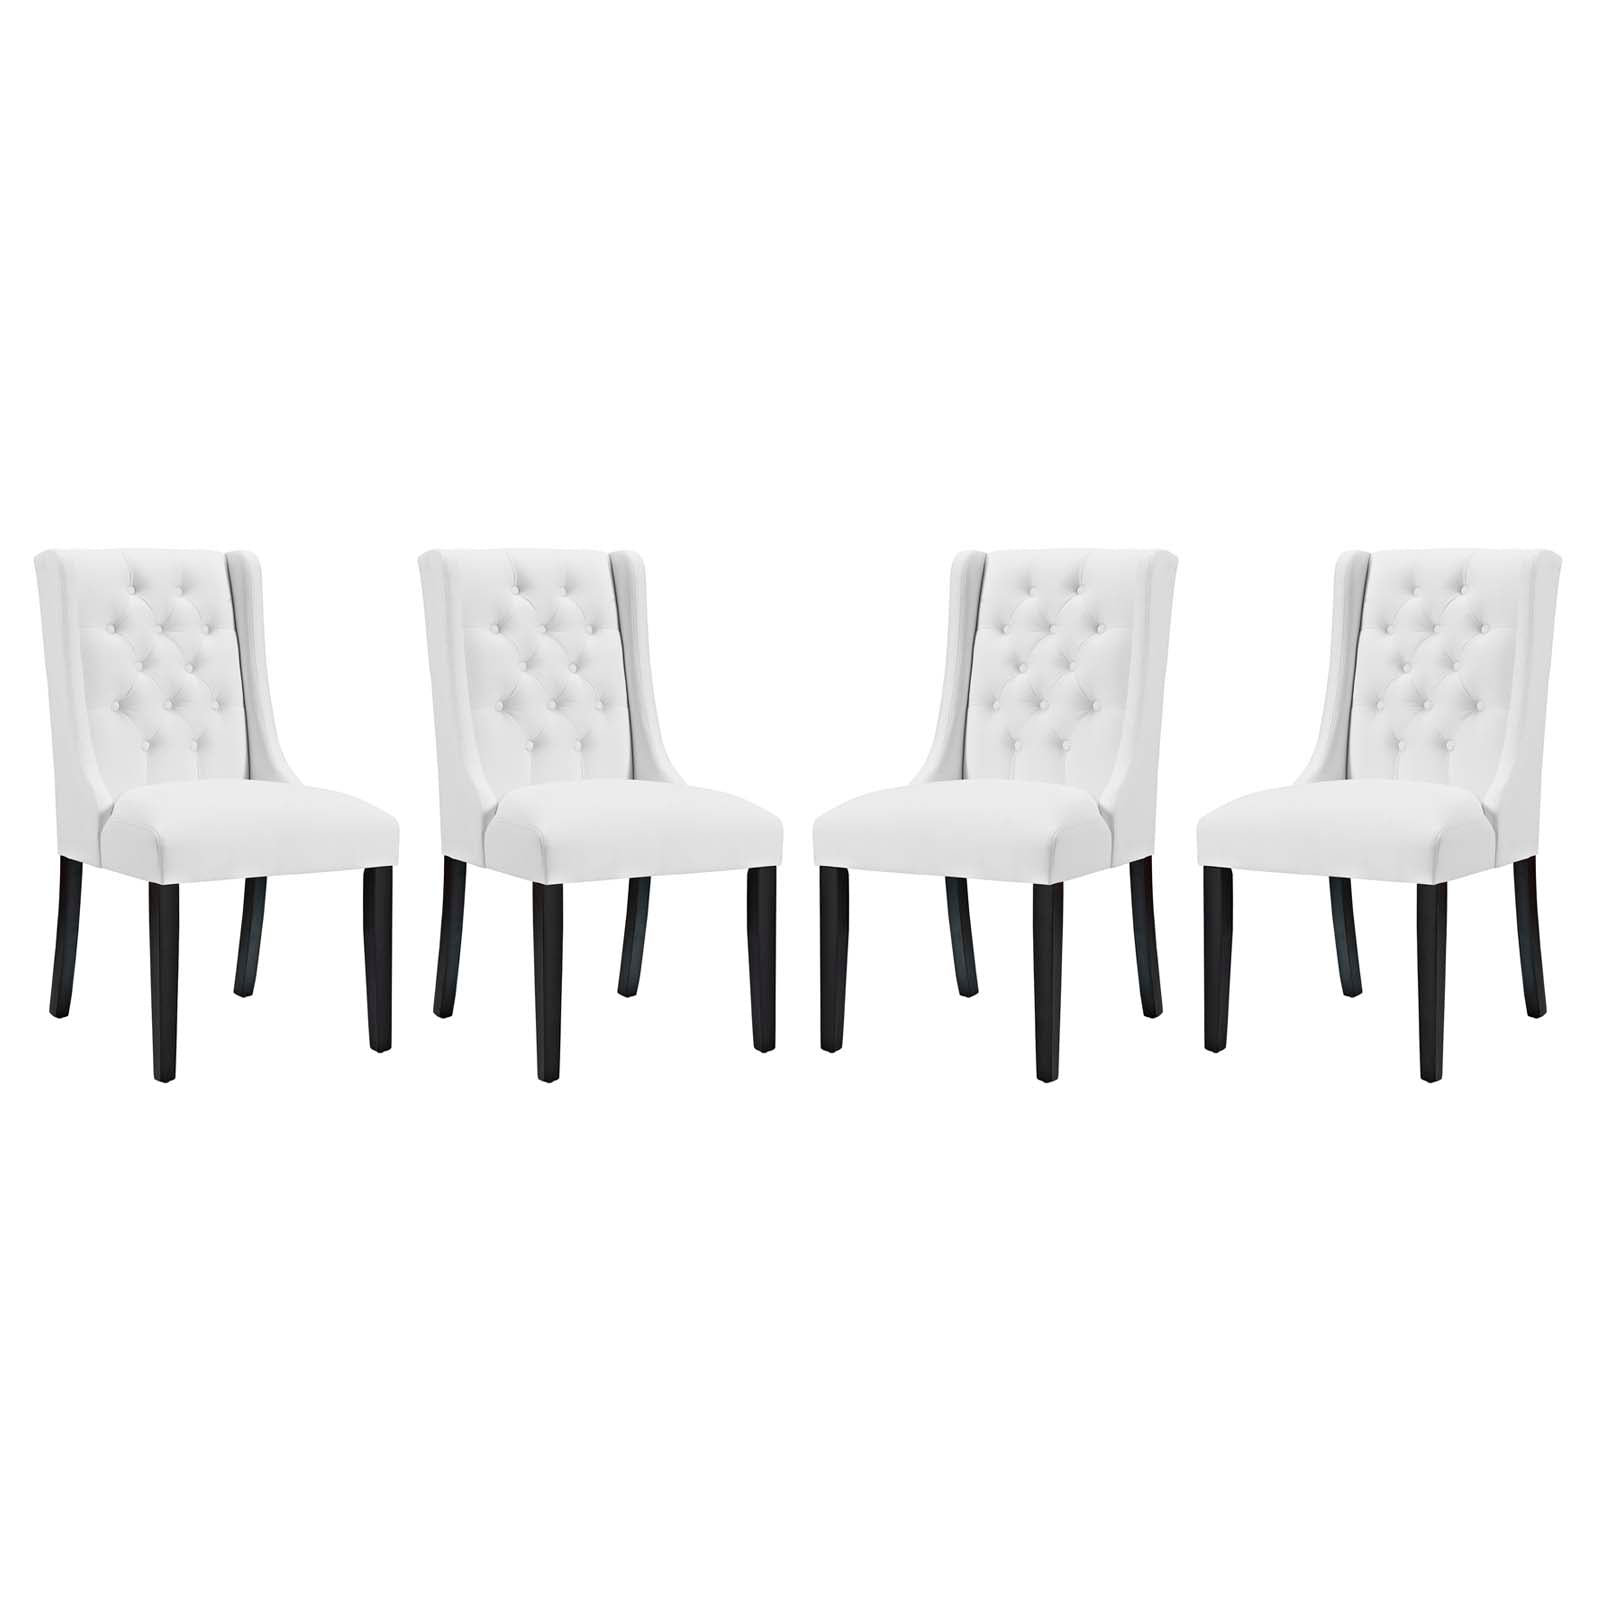 Modway Dining Chairs - Baronet Dining Chair Vinyl ( Set of 4 ) White